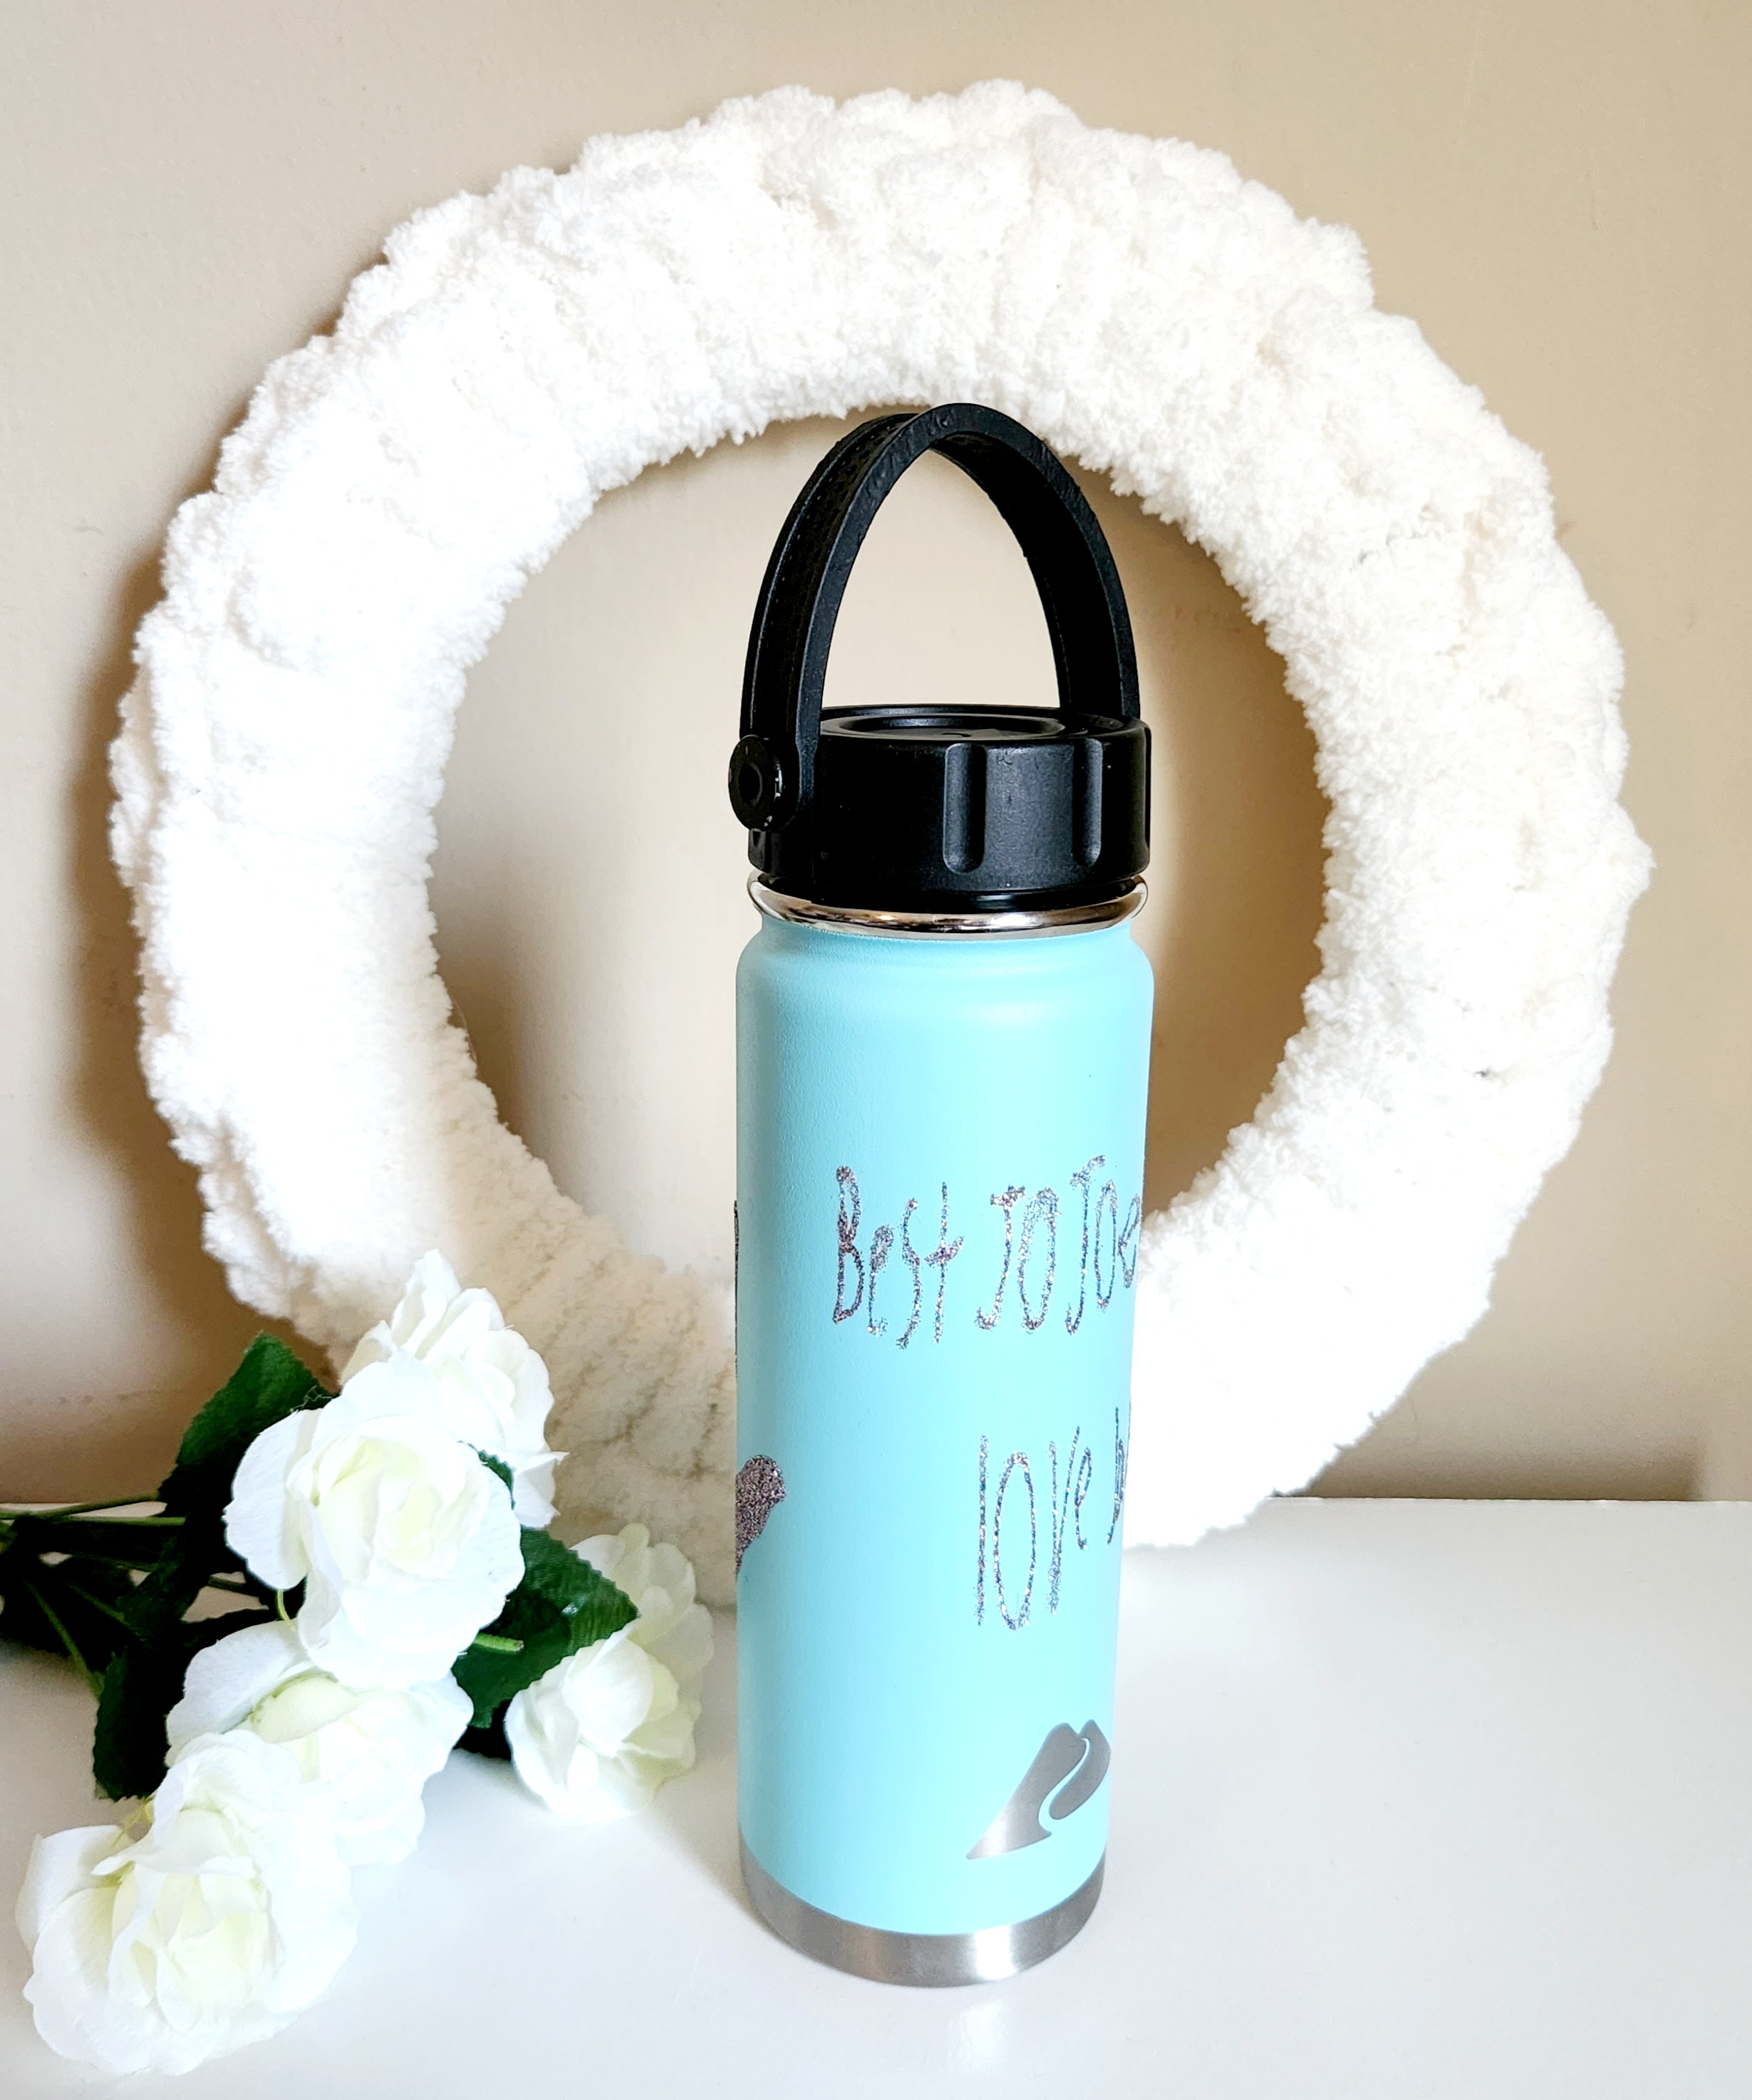 Childs handwriting cut with a Cricut in unicorn glitter HTV and applied to an aqua tumbler.